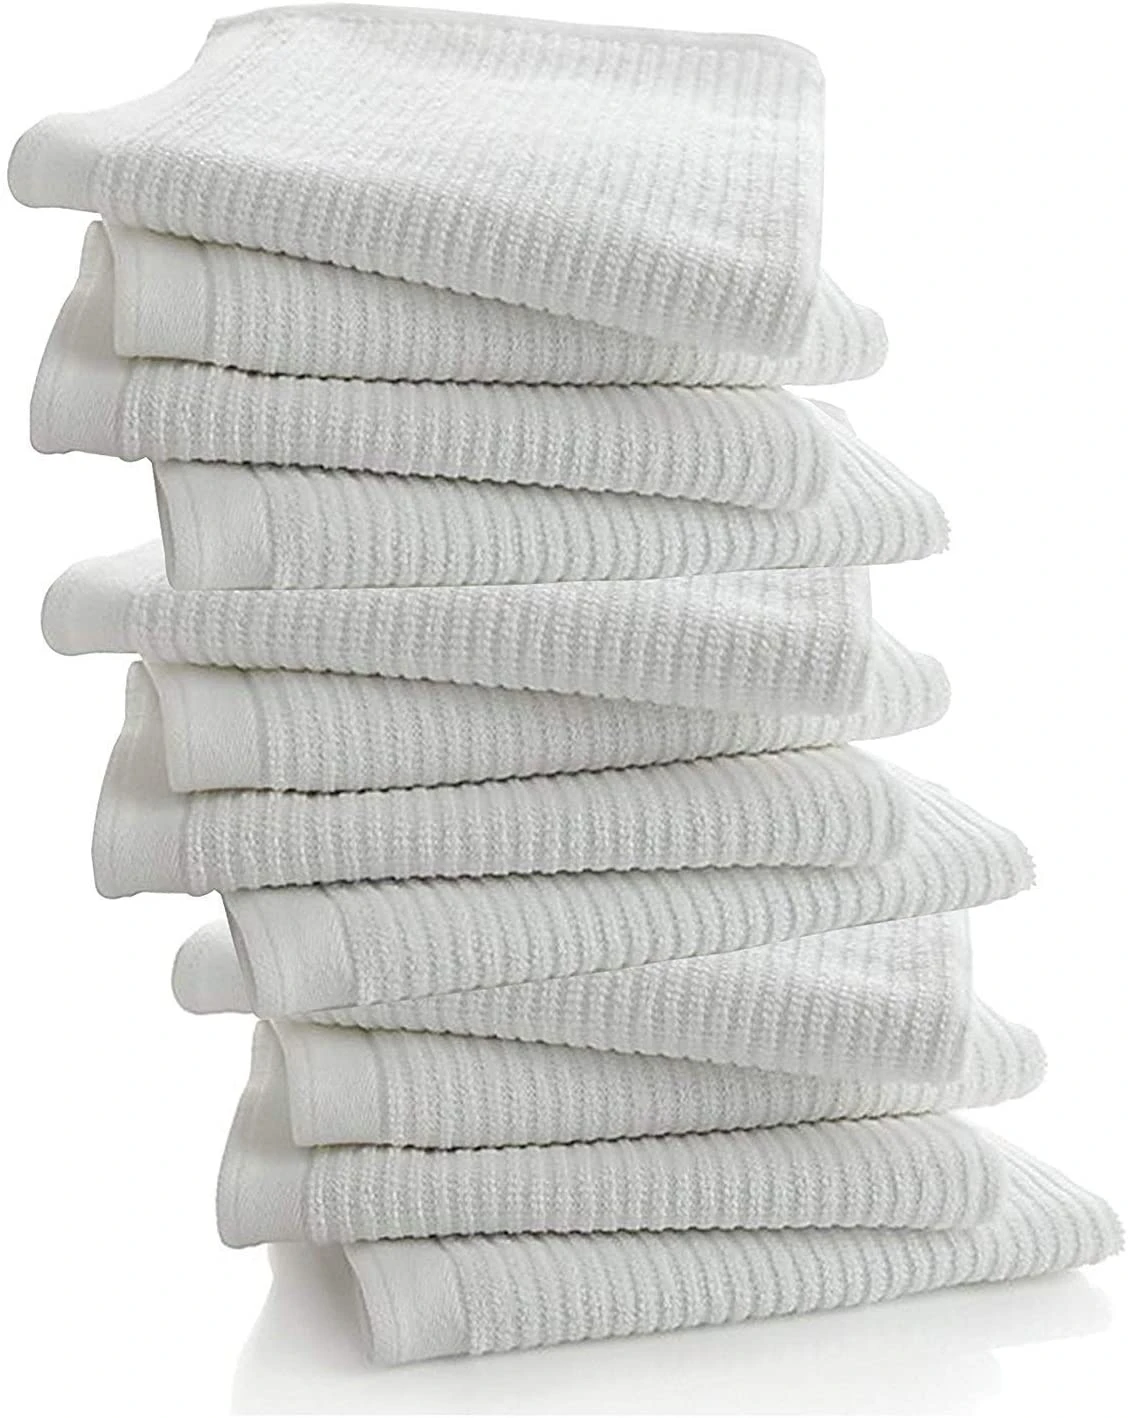 100% Cotton Terry Bar Mops Economy & All Purpose Cleaning Towel